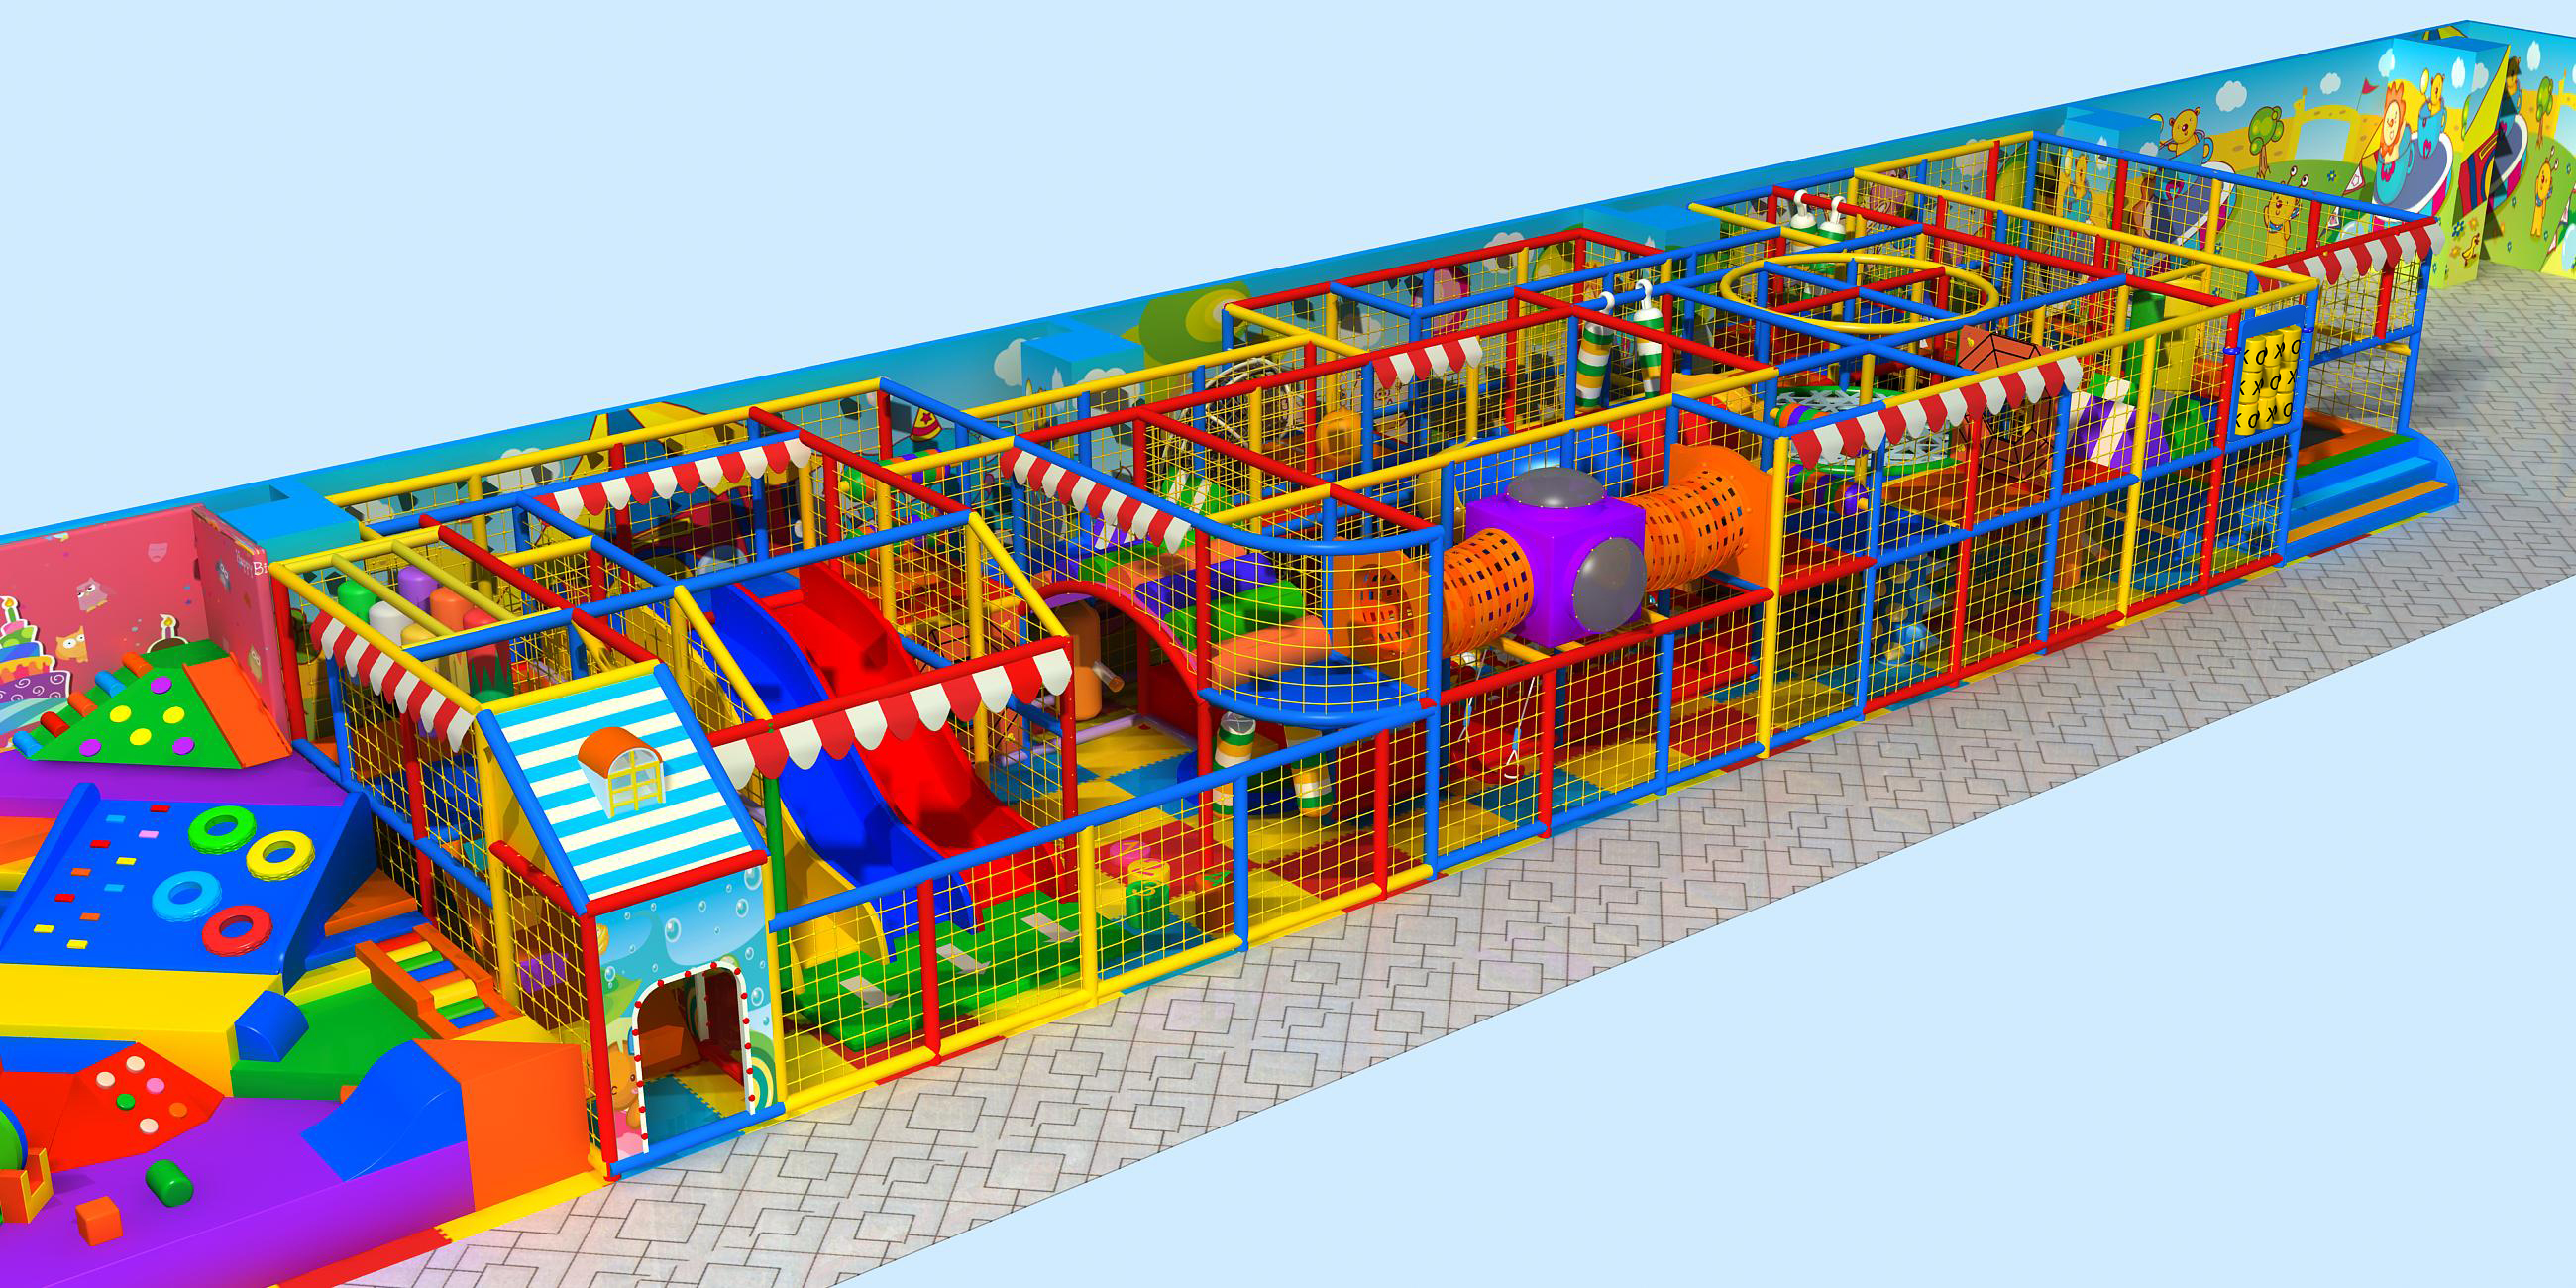 New children indoor playground castle equipment project From India